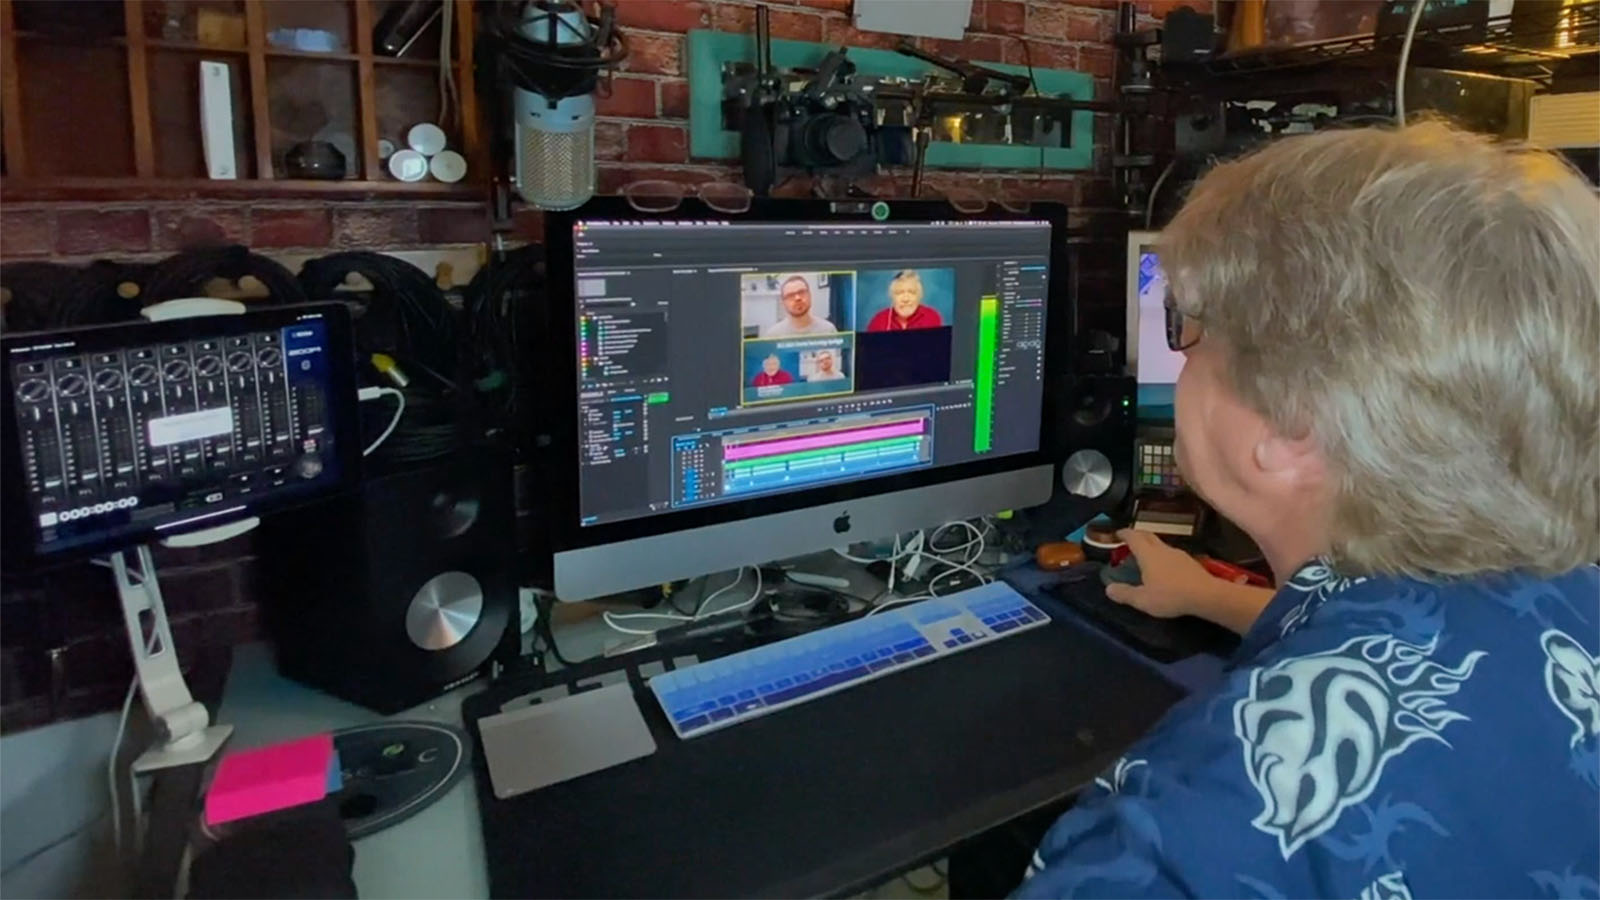 DSC editor Christopher Knell works on DSC video content in his home studio.